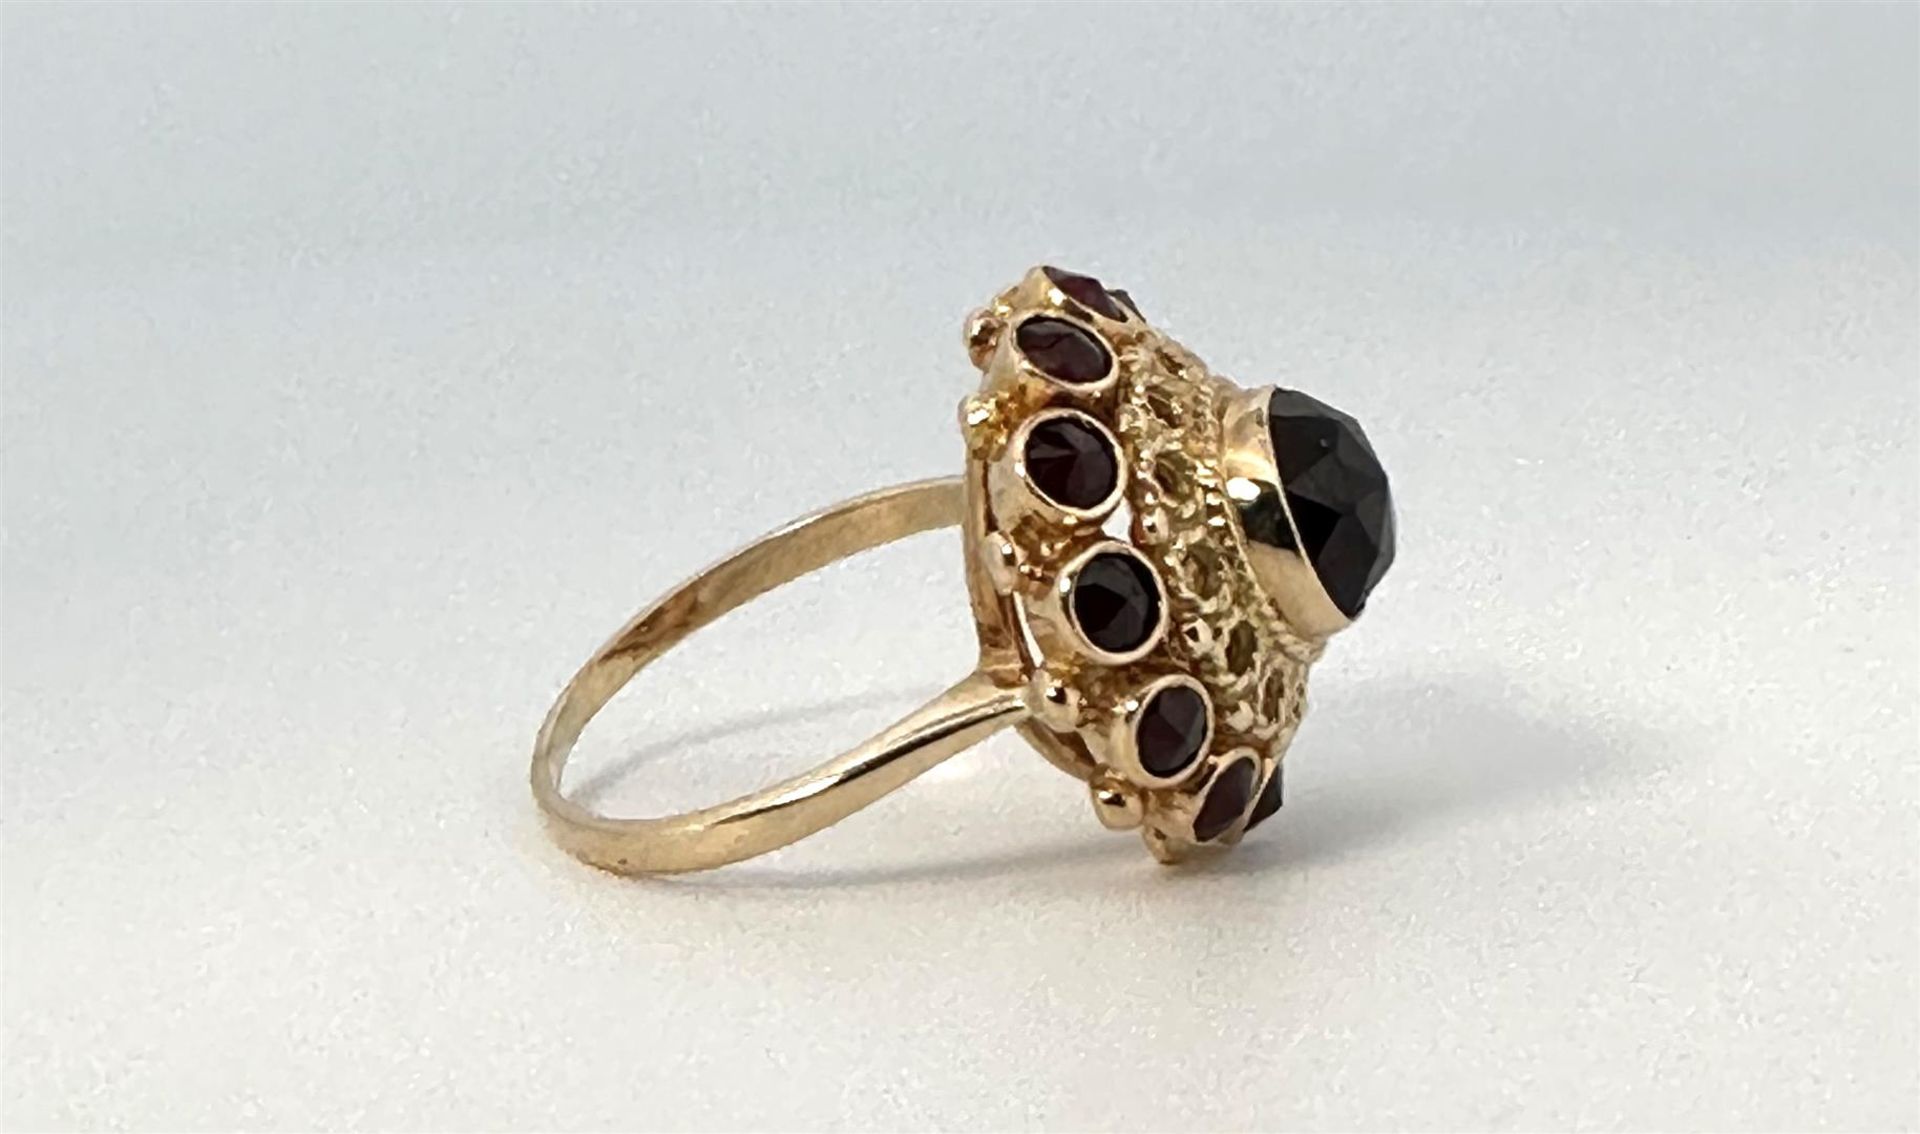 14kt yellow gold rosette ring set with garnet.
The ring is set with 1 central stone, rose cut of app - Image 4 of 4